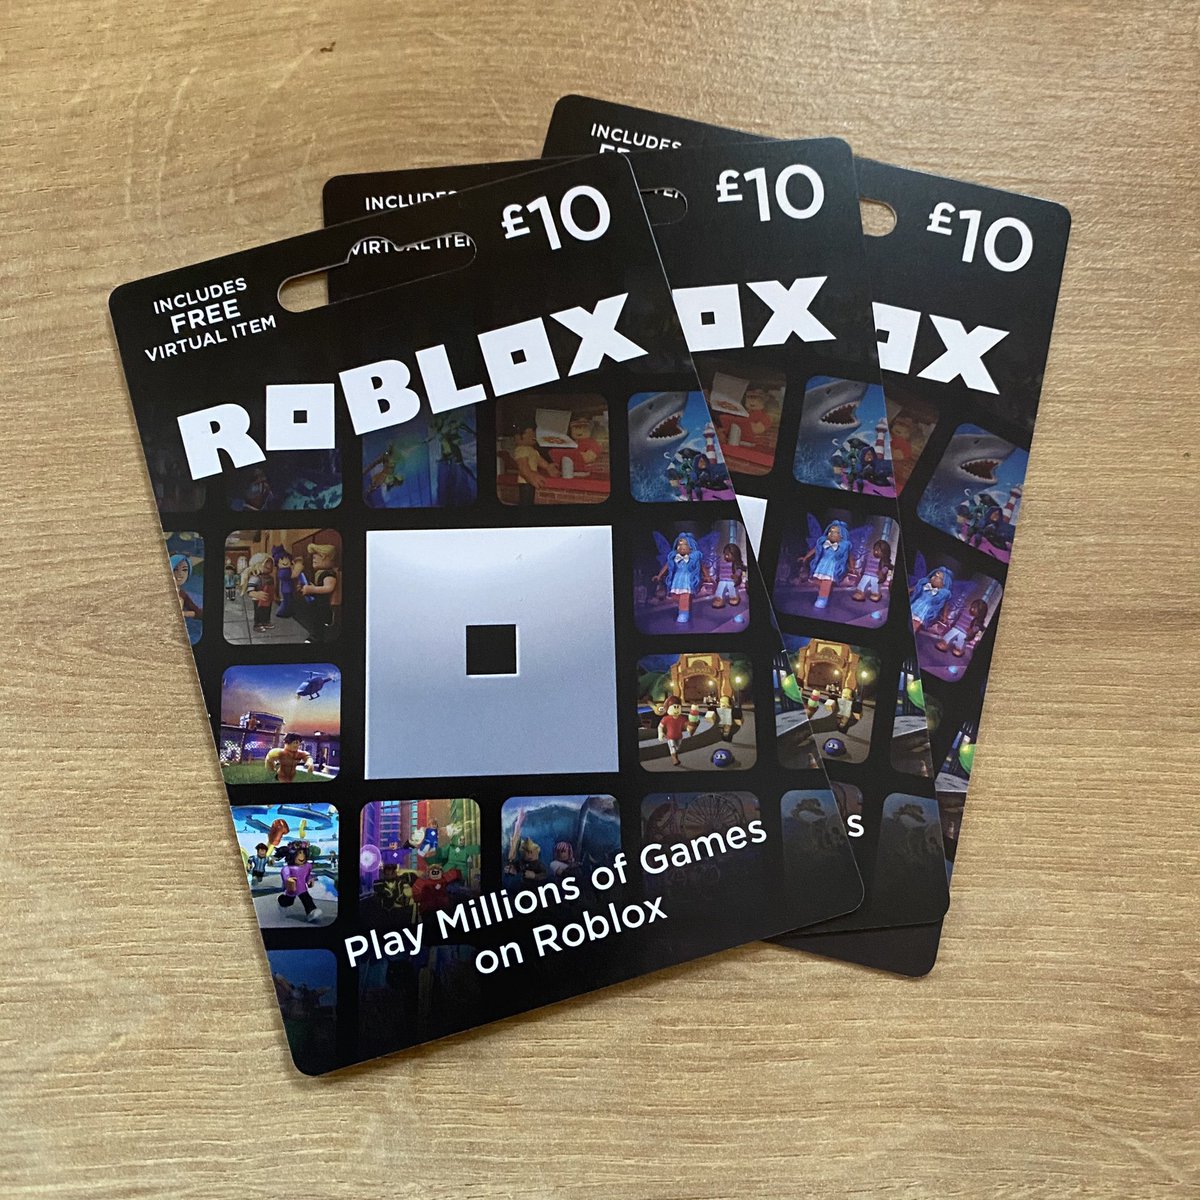 Jason Broaddudeguy1 Twitter - lonnie on twitter robux card giveaway thanks to roblox